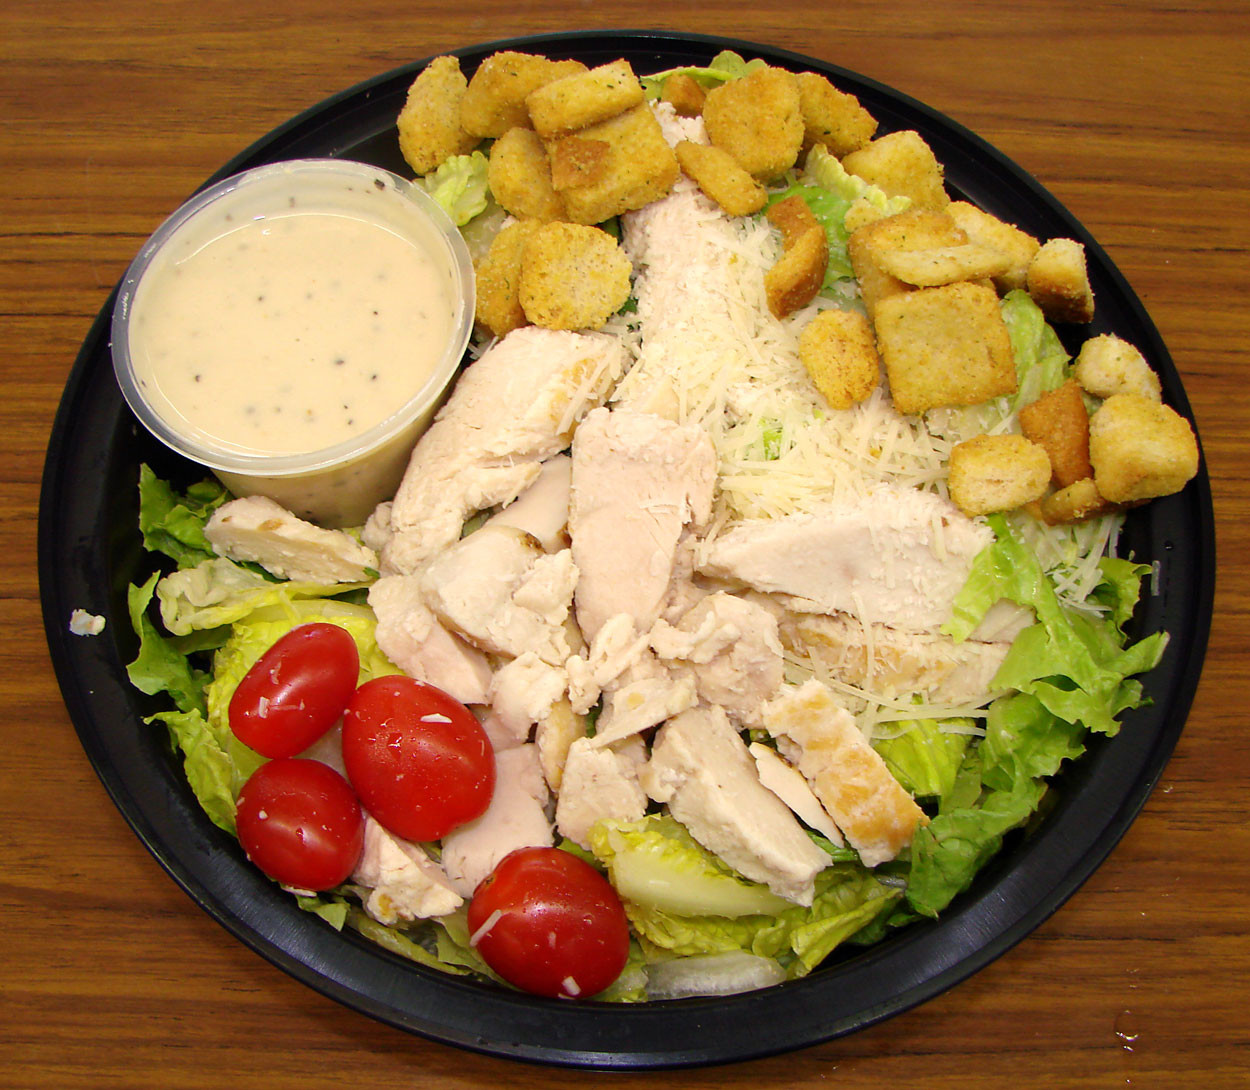 Costco Chicken Salad Recipe
 Costco Food Court Eat This Not That